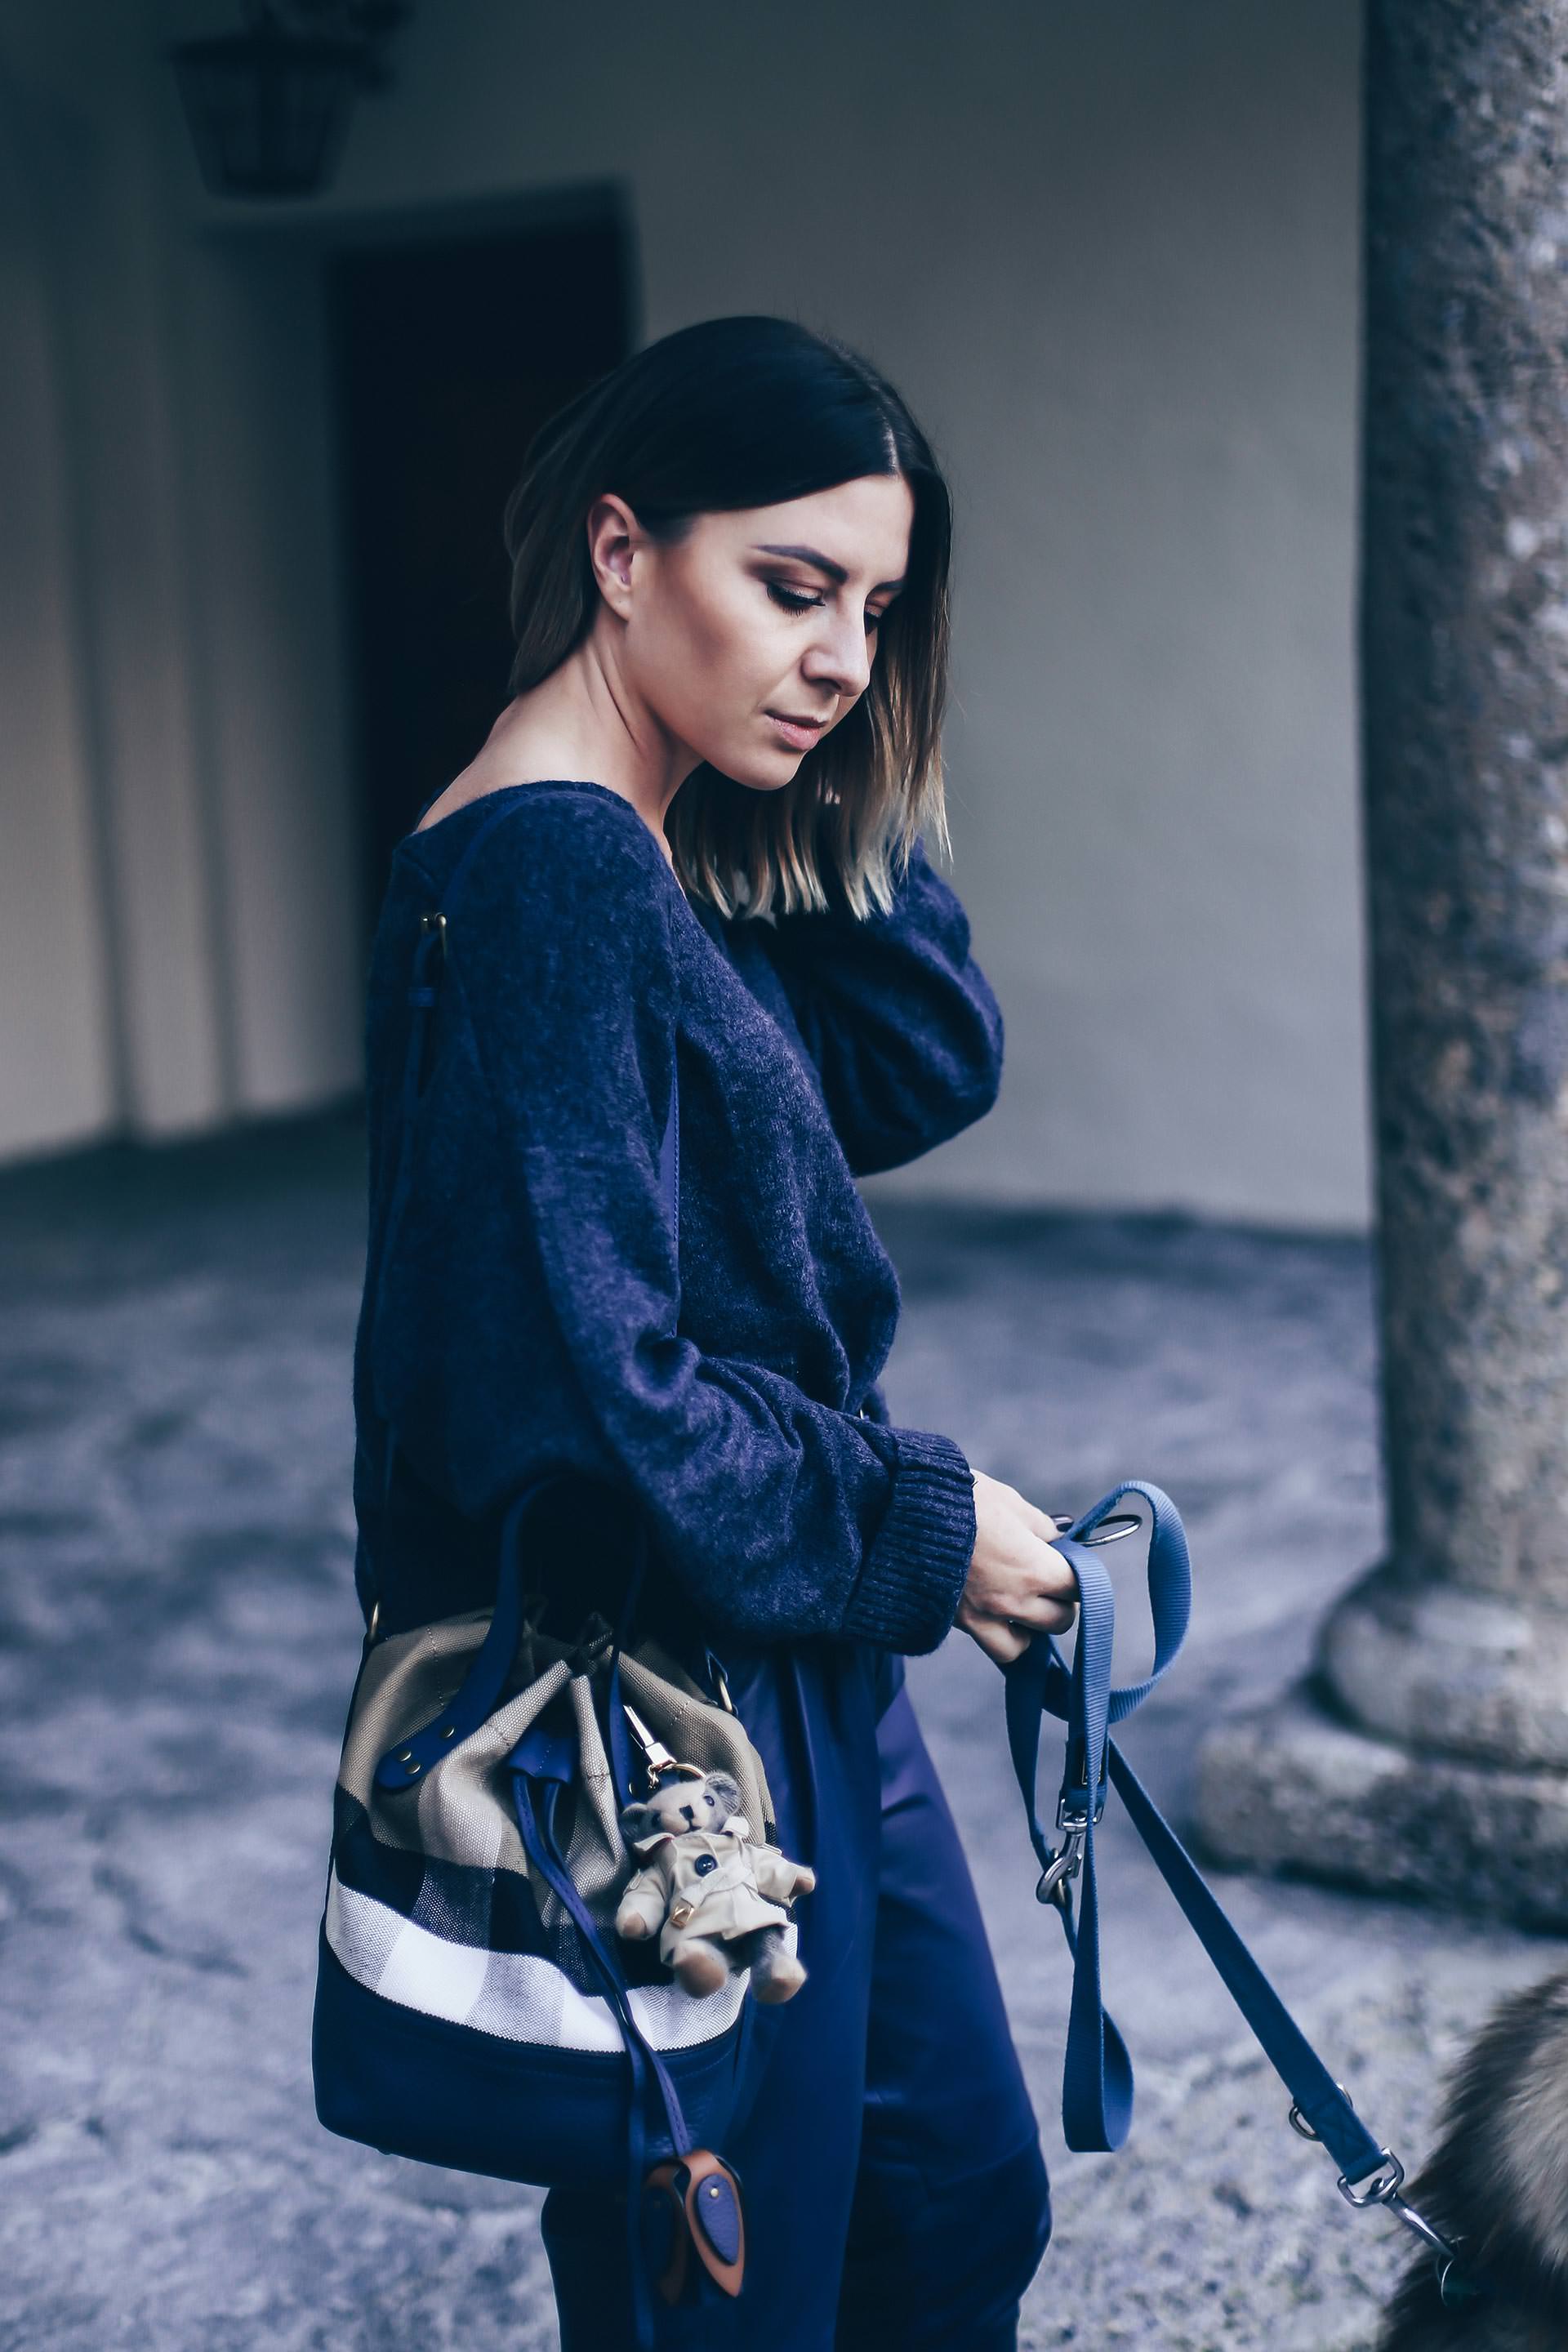 Dunkelblau kombinieren, Casual Chic Styling mit Isabel Marant Bobby Sneaker Wedges, oversize Strickpullover und Burberry Beuteltasche, Herbst Outfit, Herbst Trends 2017, Fashion Blog, Modeblog, Outfit of the Day, www.whoismocca.com